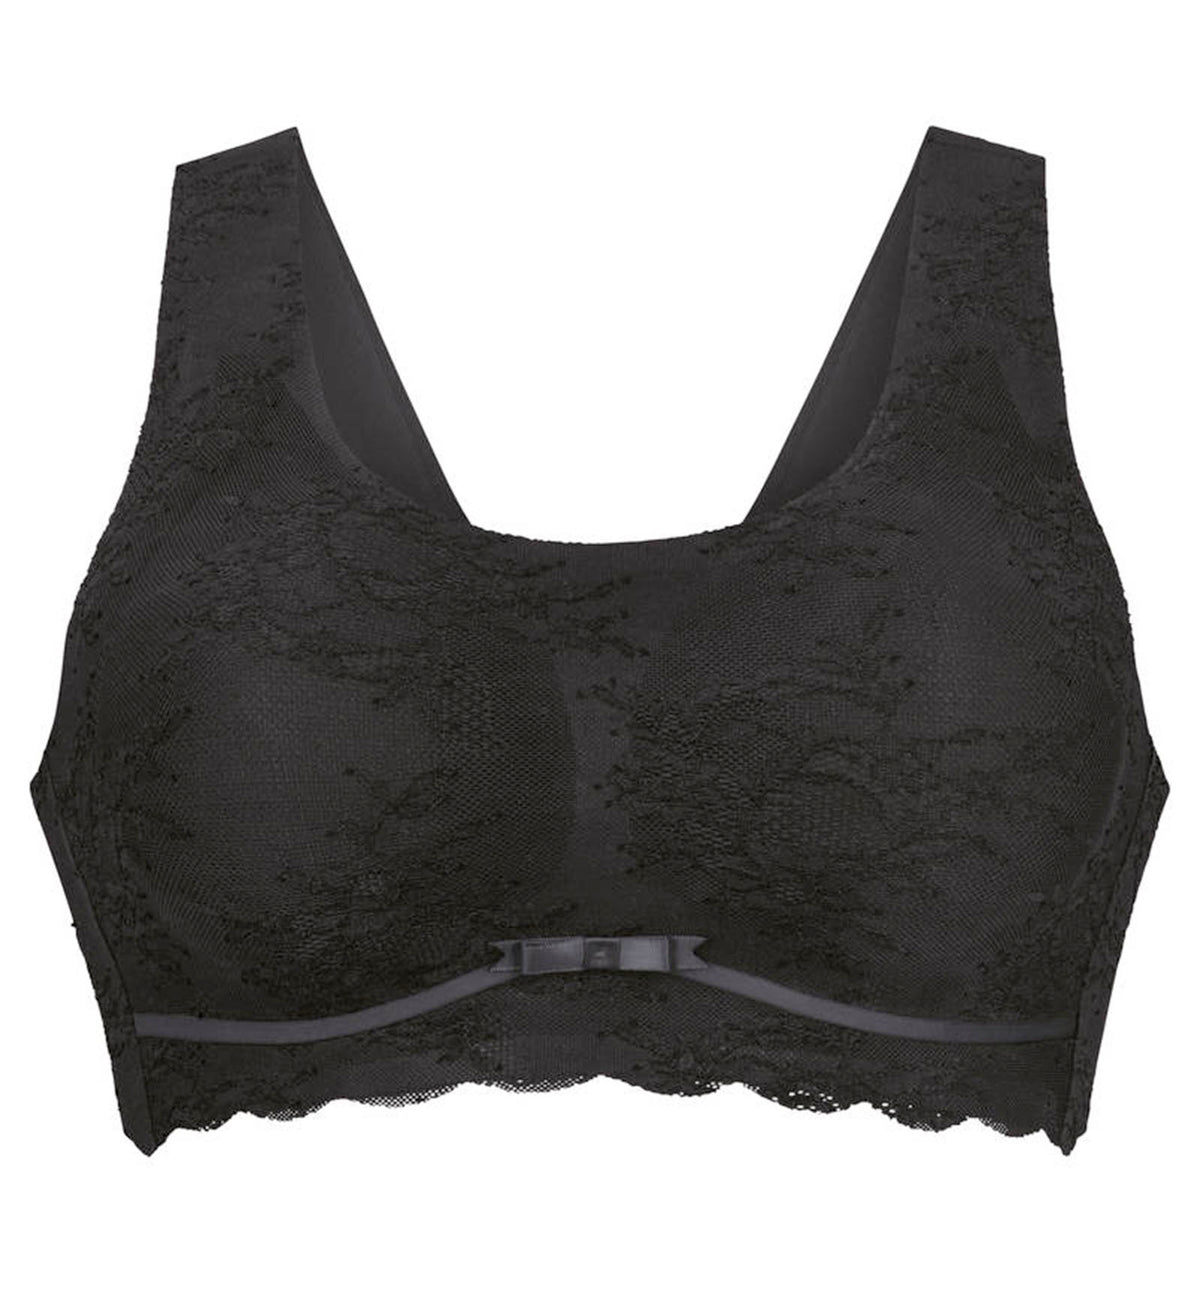 Anita Essentials Lace Lightly Padded Bralette (5400),XS,Anthracite - Anthracite,XS